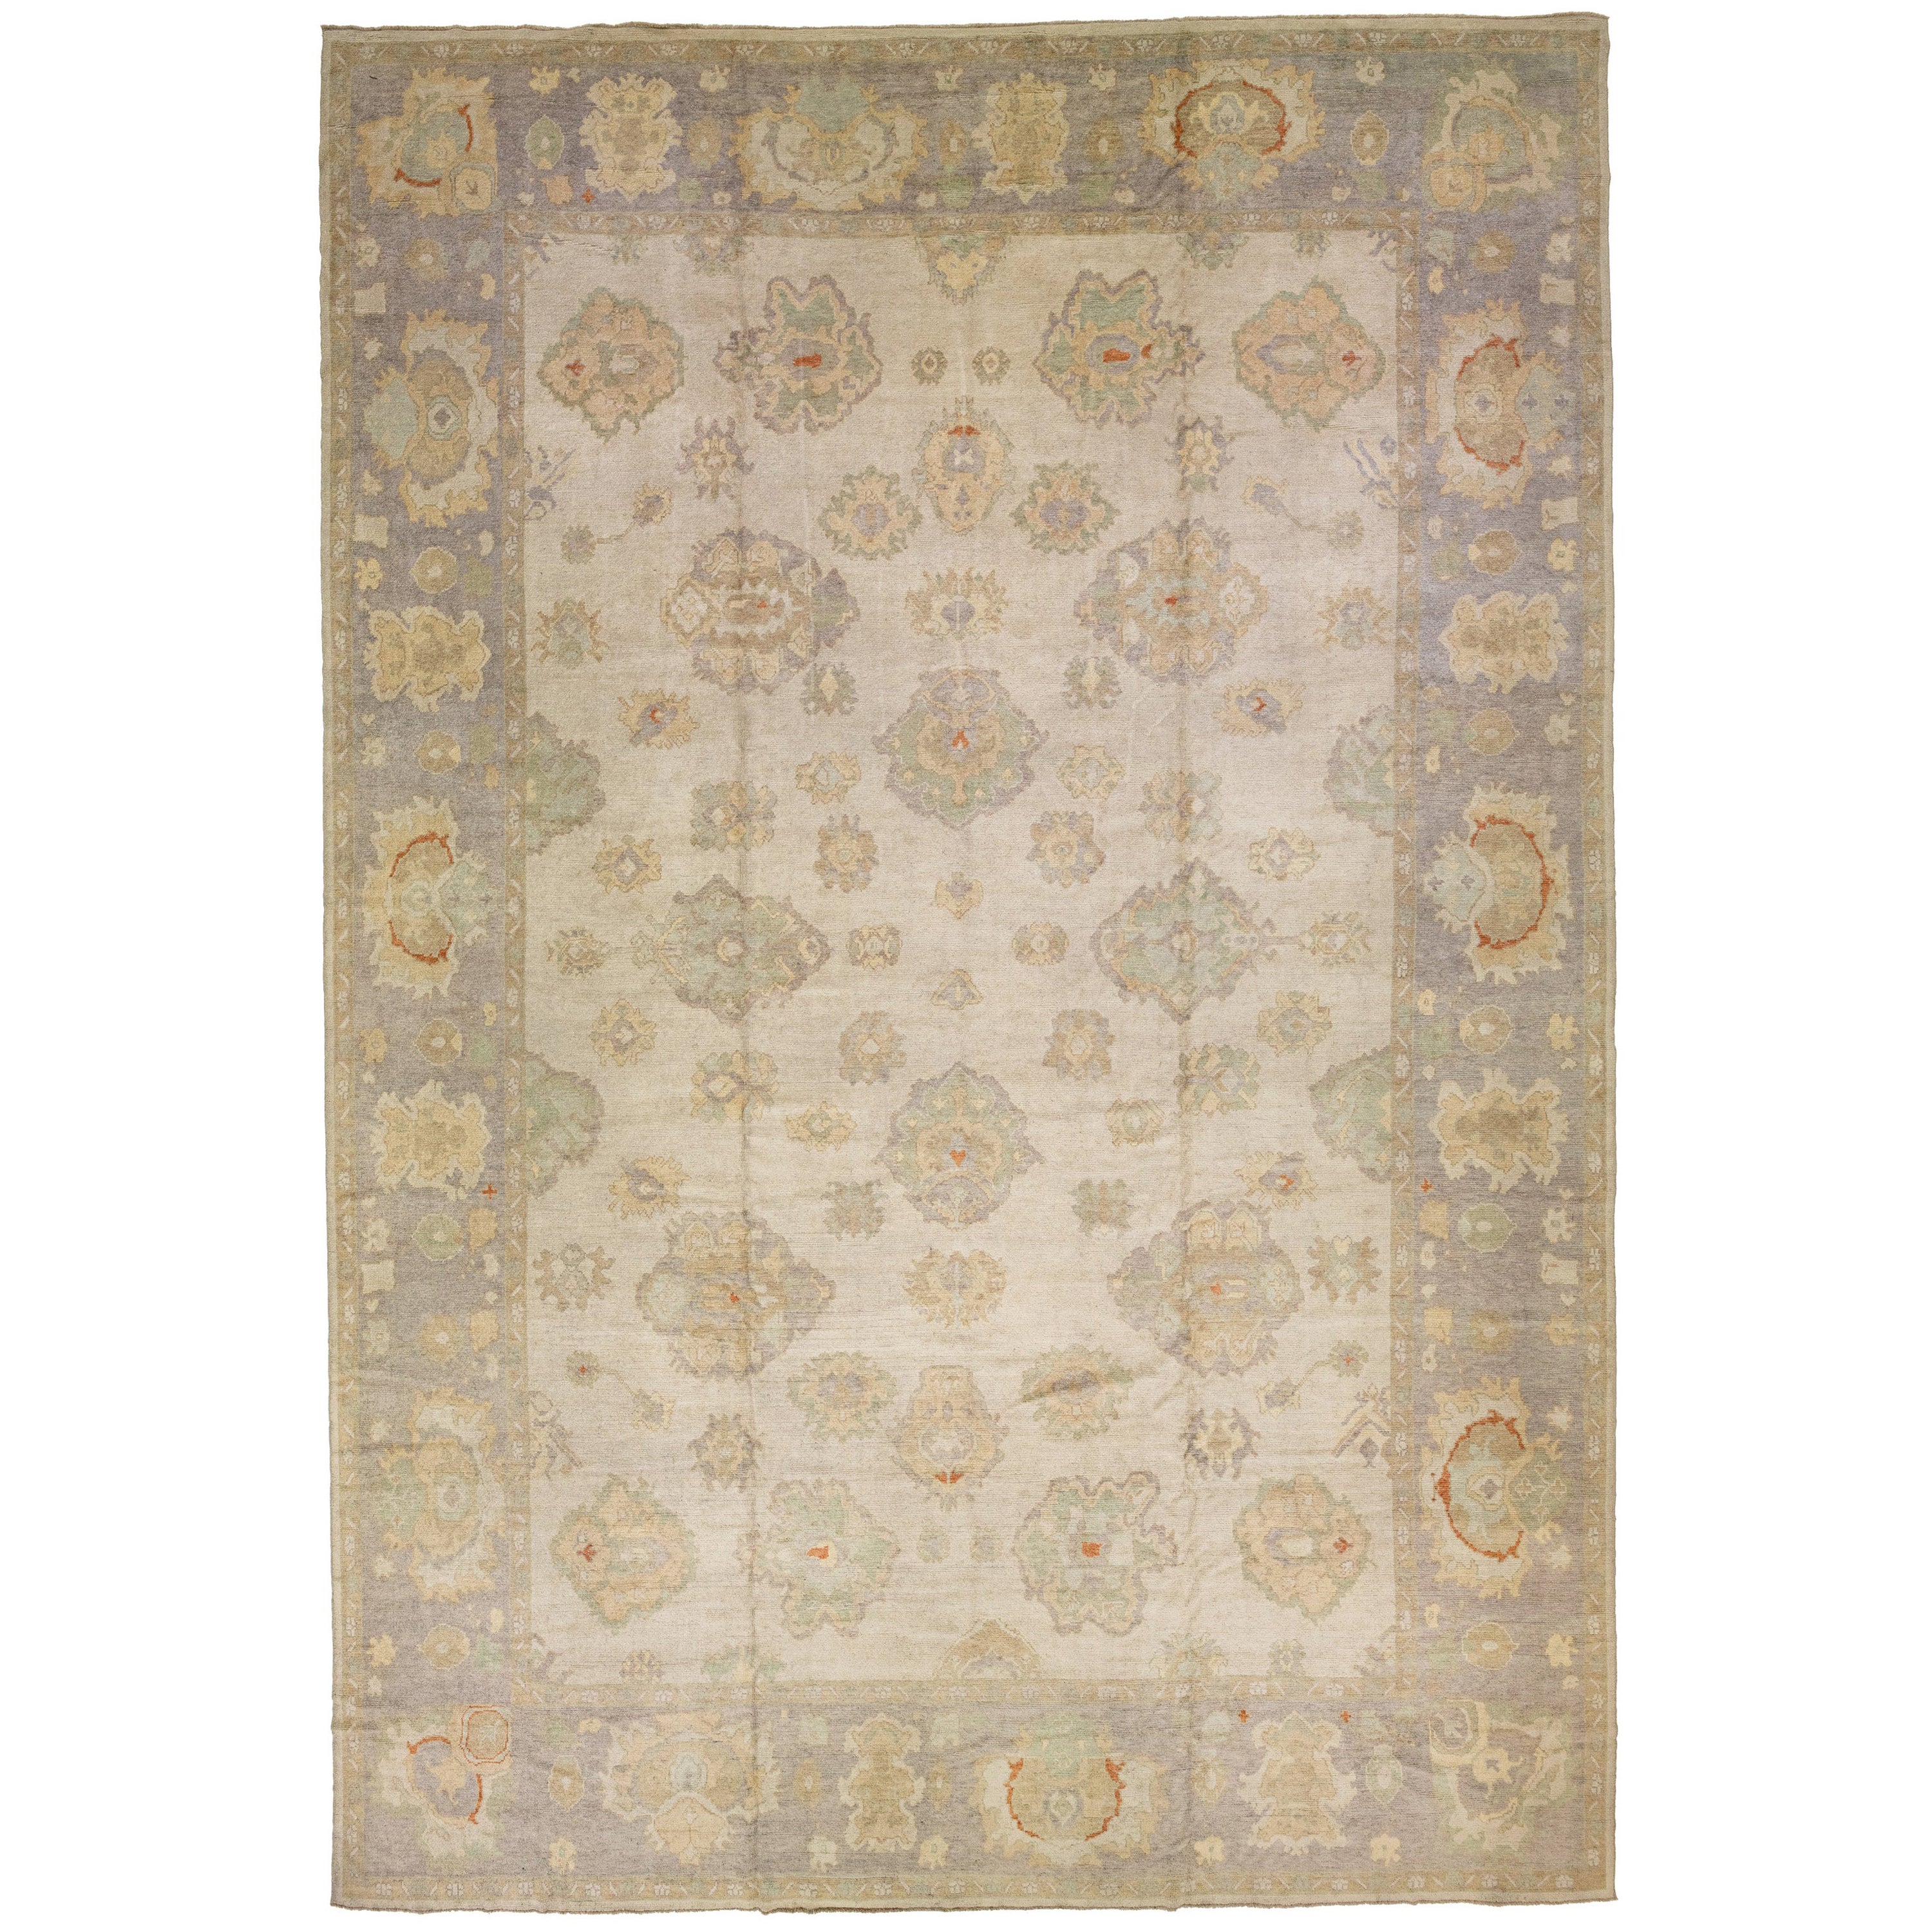 Oversize Handmade Contemporary Oushak Wool Rug In Beige with Floral Motif